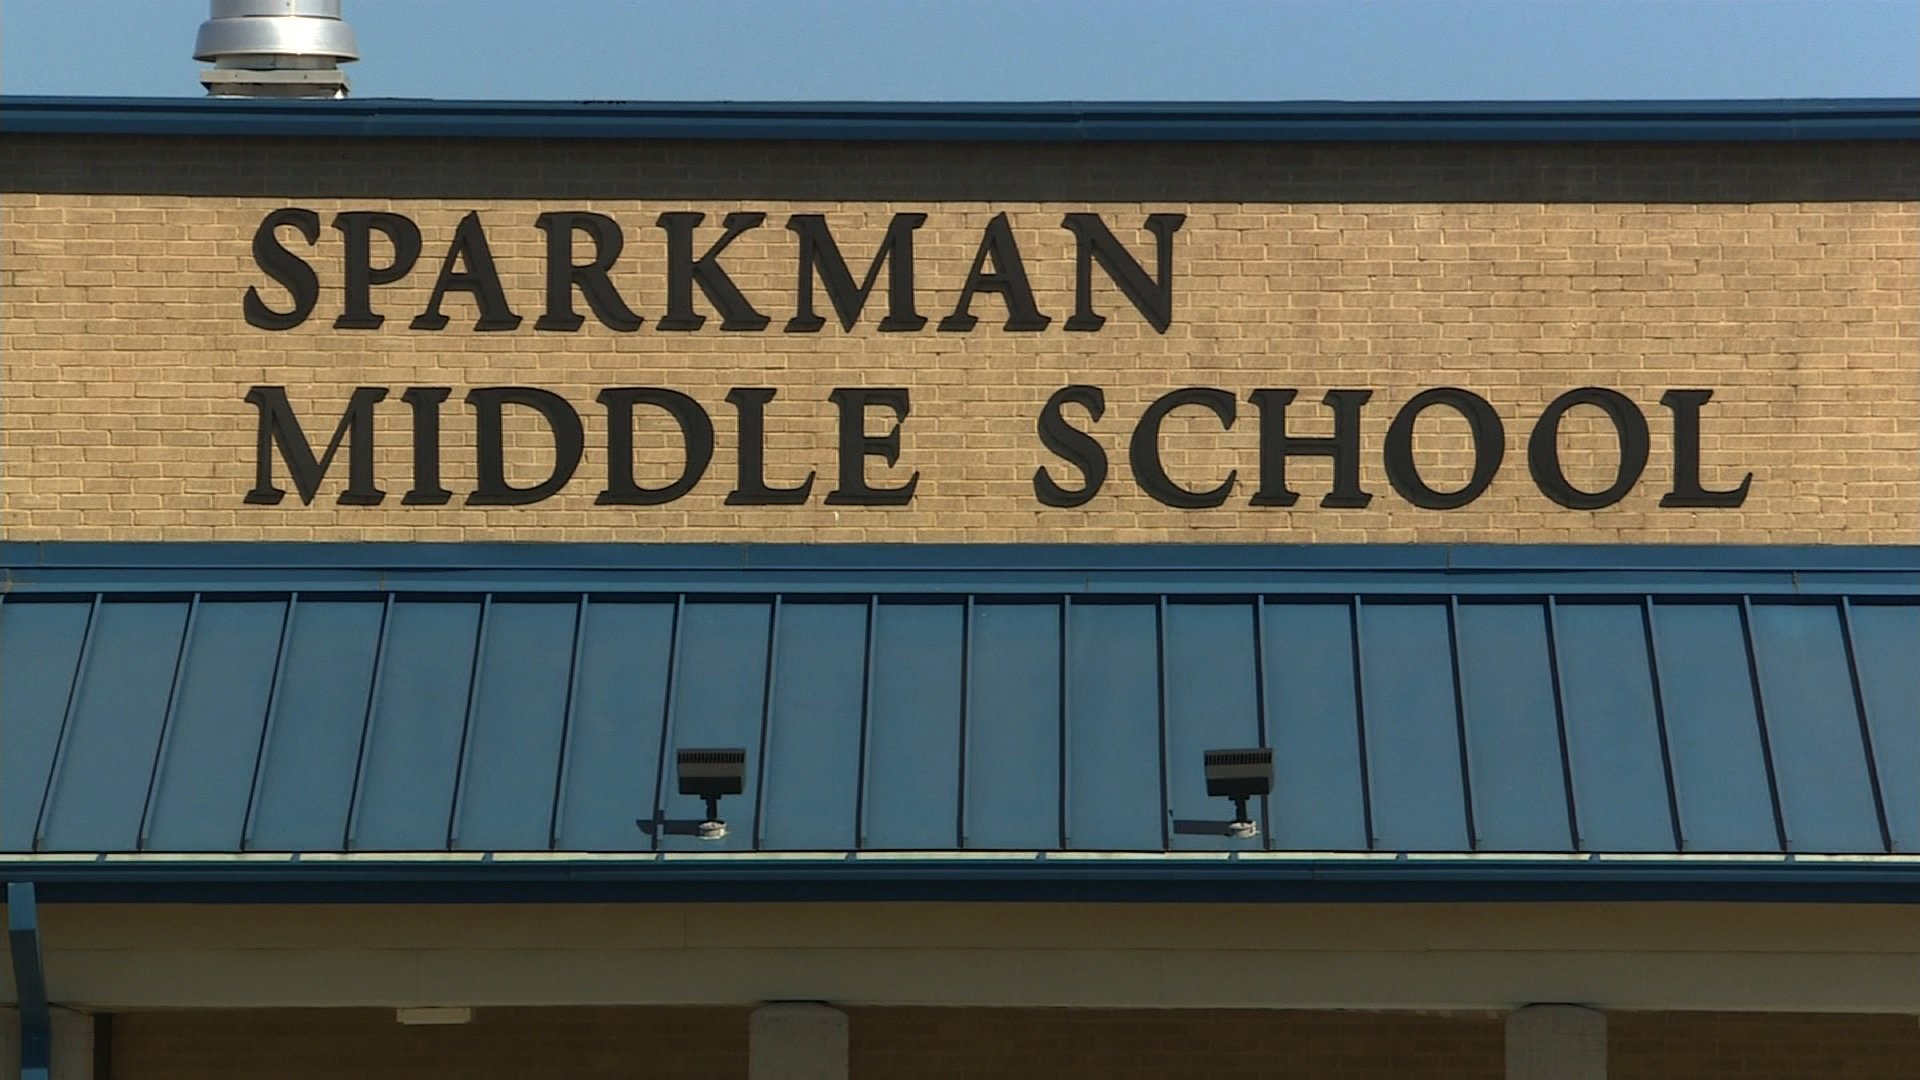 The U.S. Court of Appeals for the Eleventh Circuit agreed to hear oral arguments in an Alabama 'rape baiting' case that happened at Sparkman Middle School in Toney, Alabama, on Jan. 22, 2010. A then-14-year-old girl with special needs said she was persuaded by a teacher's aid to act as bait to catch an accused sexual predator. The accused predator allegedly sodomized her in a school bathroom.